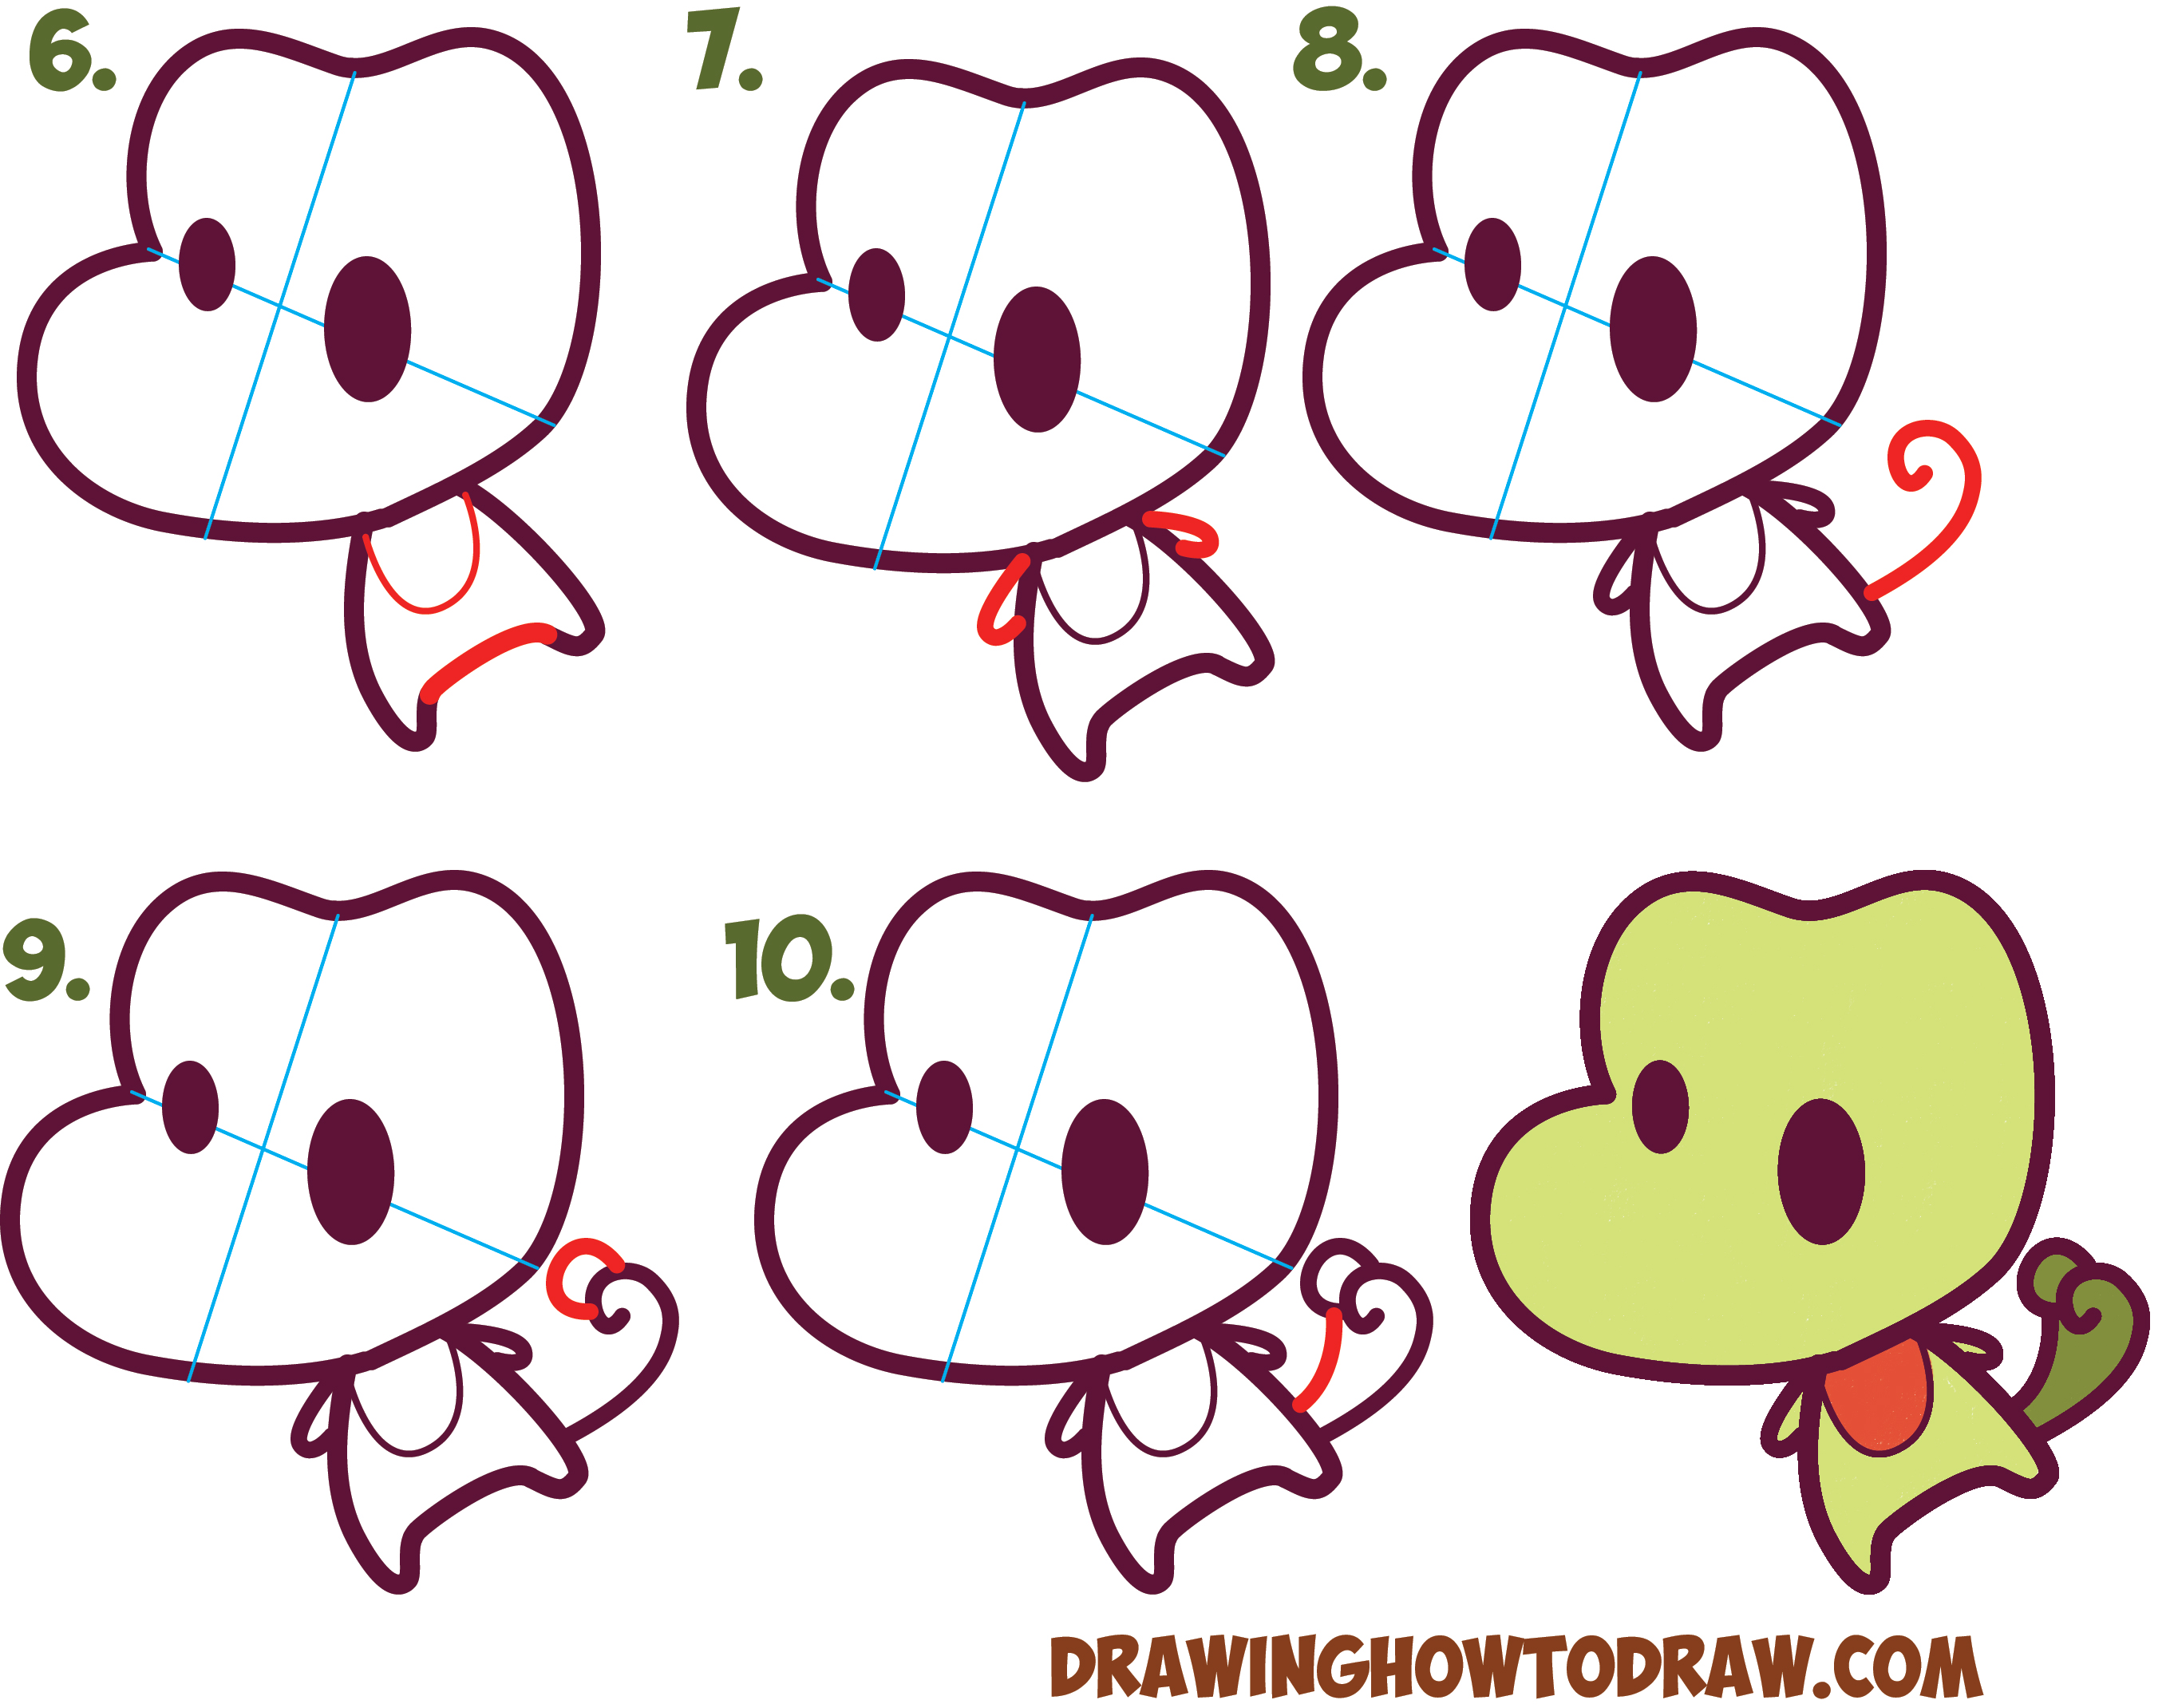 Learn How to Draw Treecko from Pokemon (Cute / Chibi / Kawaii) Simple Steps Drawing Lesson for Kids